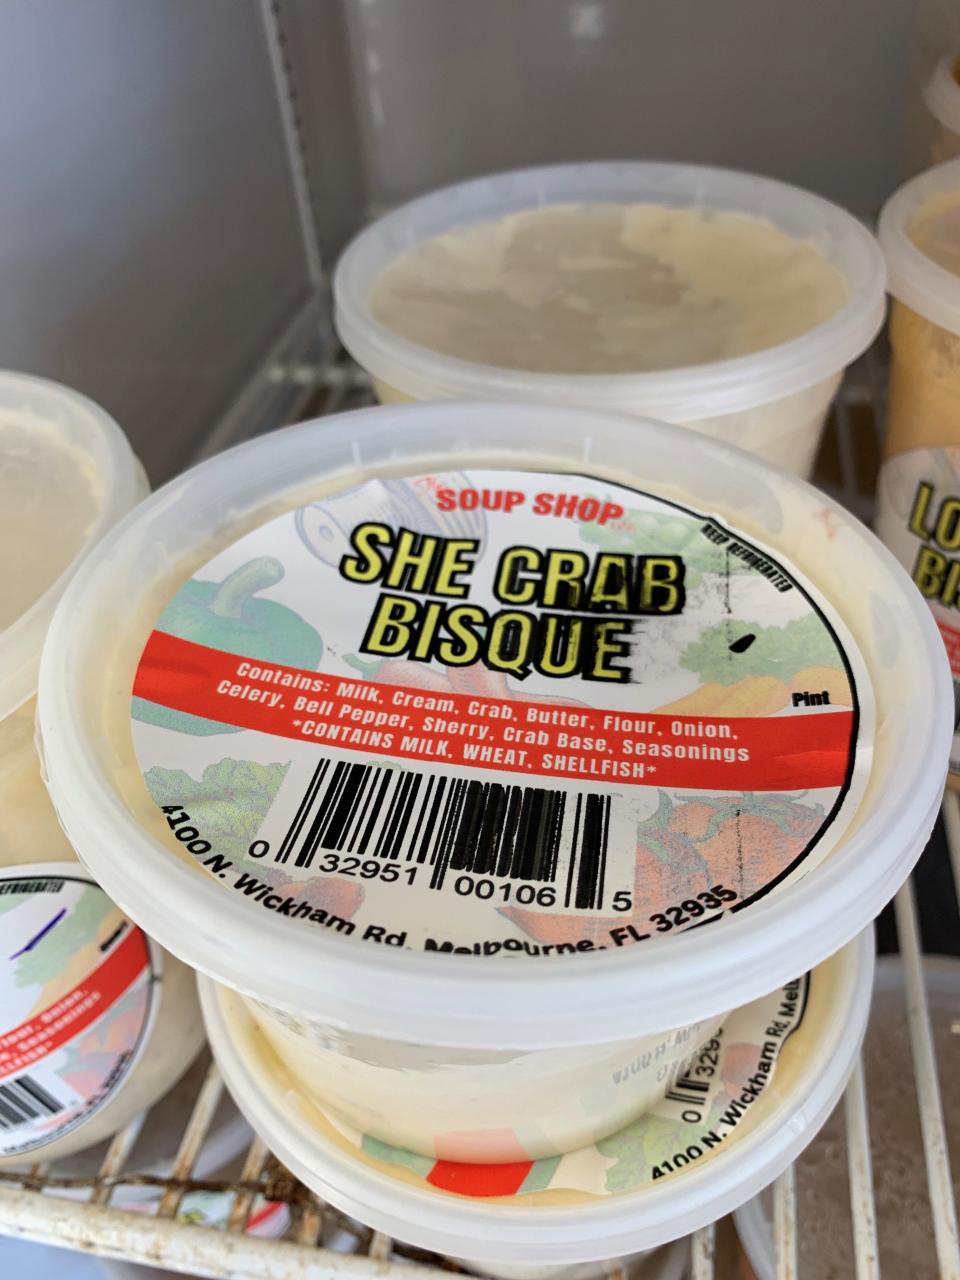 She Crab Bisque is one of the biggest sellers at the Soup Shop in Melbourne.